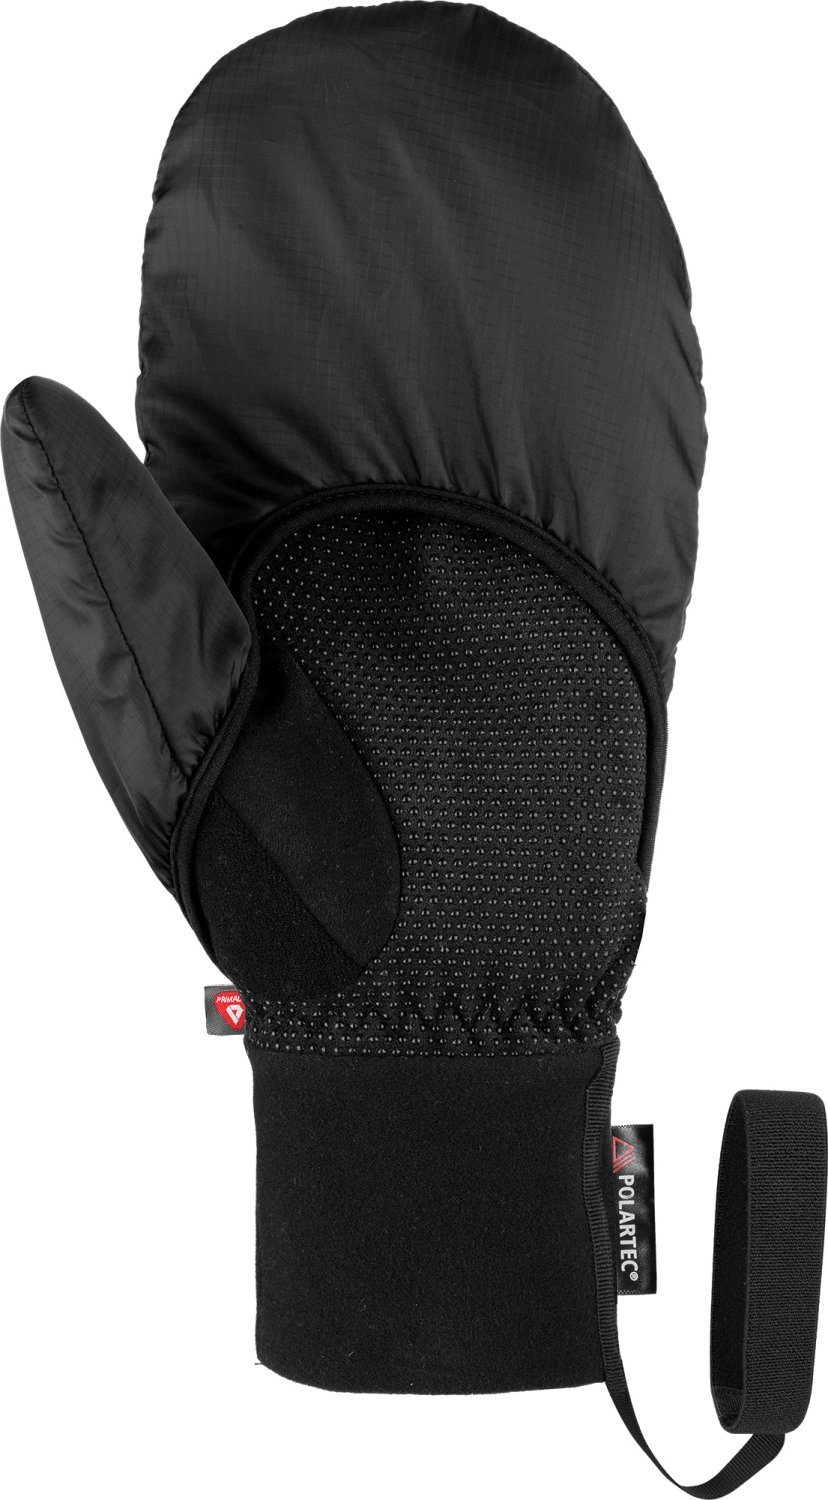 Baffin TOUCH-TEC Reusch Handschuh Reusch Fleecehandschuhe